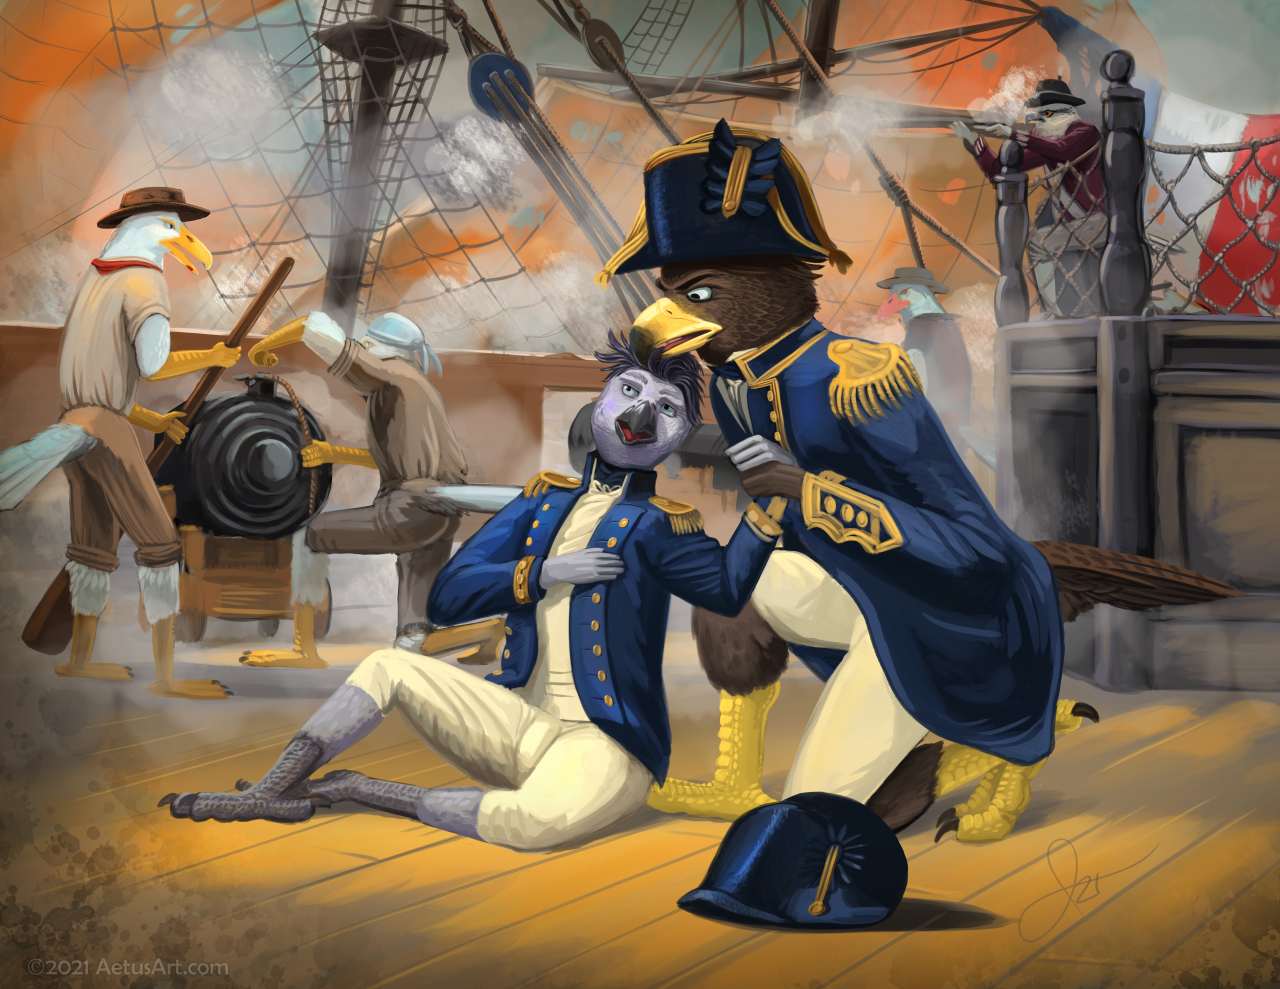 The deck of a naval ship during battle. Combatants are birds dressed in English 19th century naval uniforms and the captain, an anthropomorphic gray parrot, has taken a fatal hit. He is lying on the ground being comforted by his first officer who is a hawk.